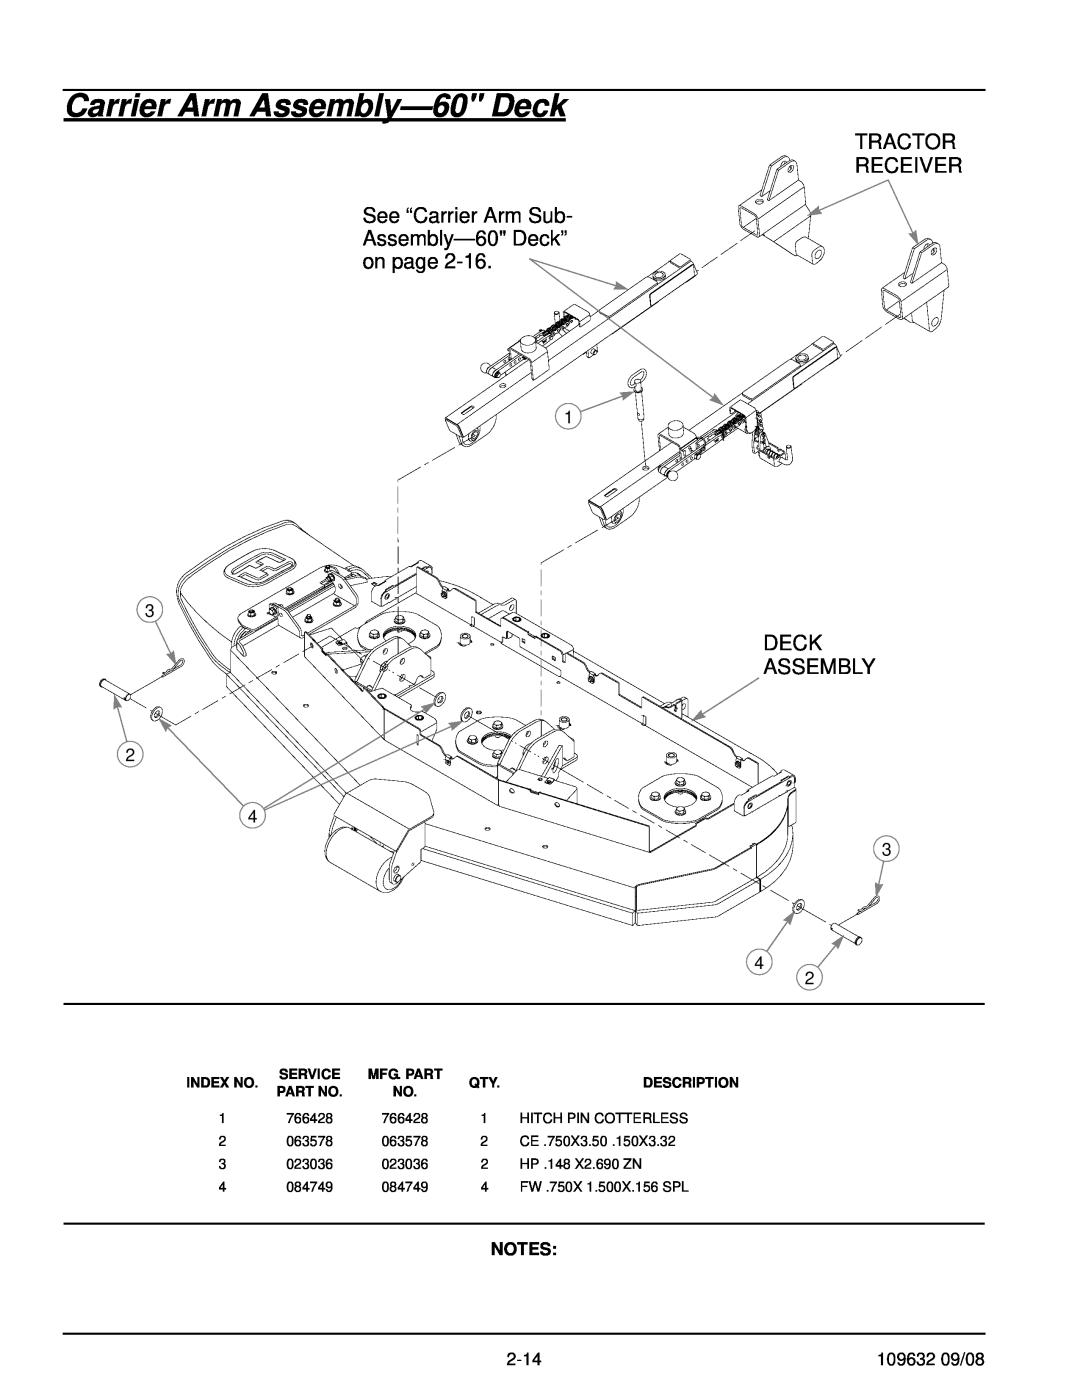 Hustler Turf 928739 Carrier Arm Assembly-60 Deck, TRACTOR RECEIVER See “Carrier Arm Sub Assembly-60 Deck” on page, Service 